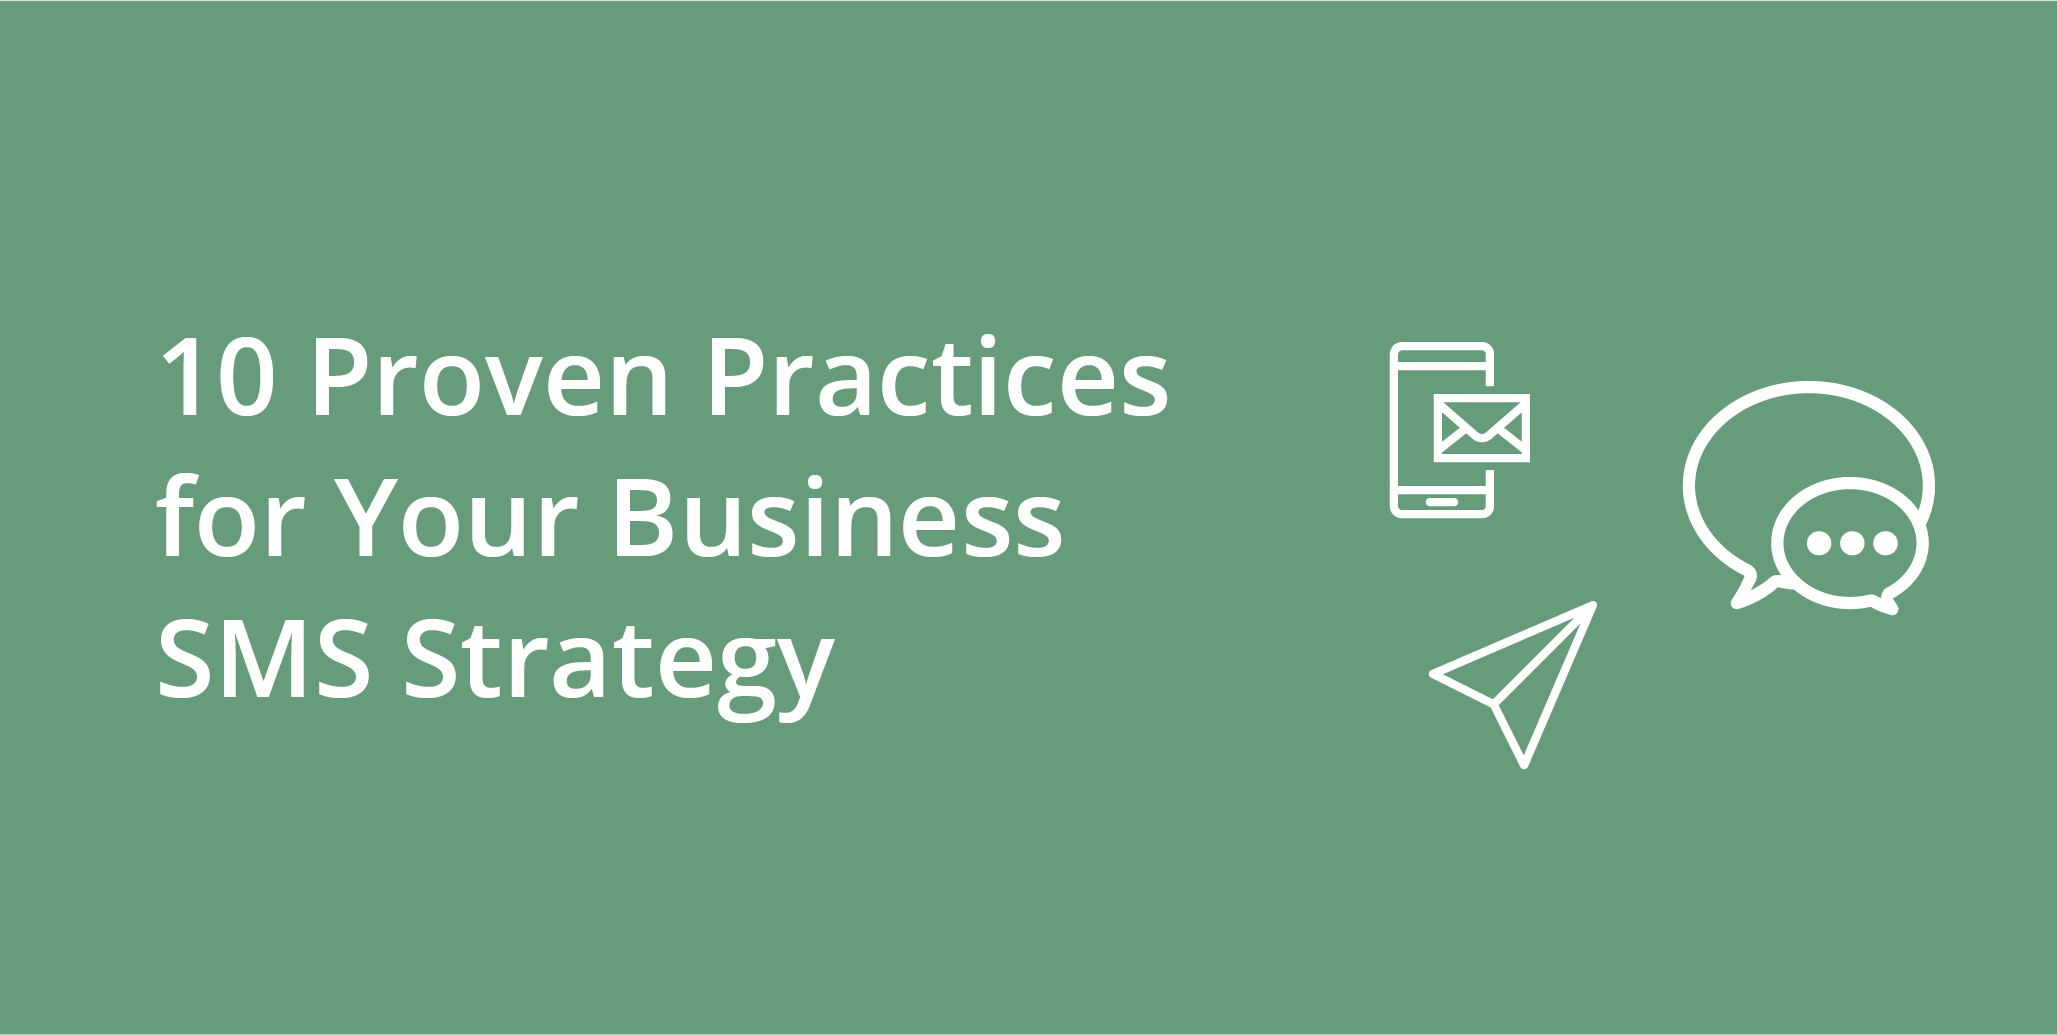 10 Proven Practices for Your Business SMS Strategy